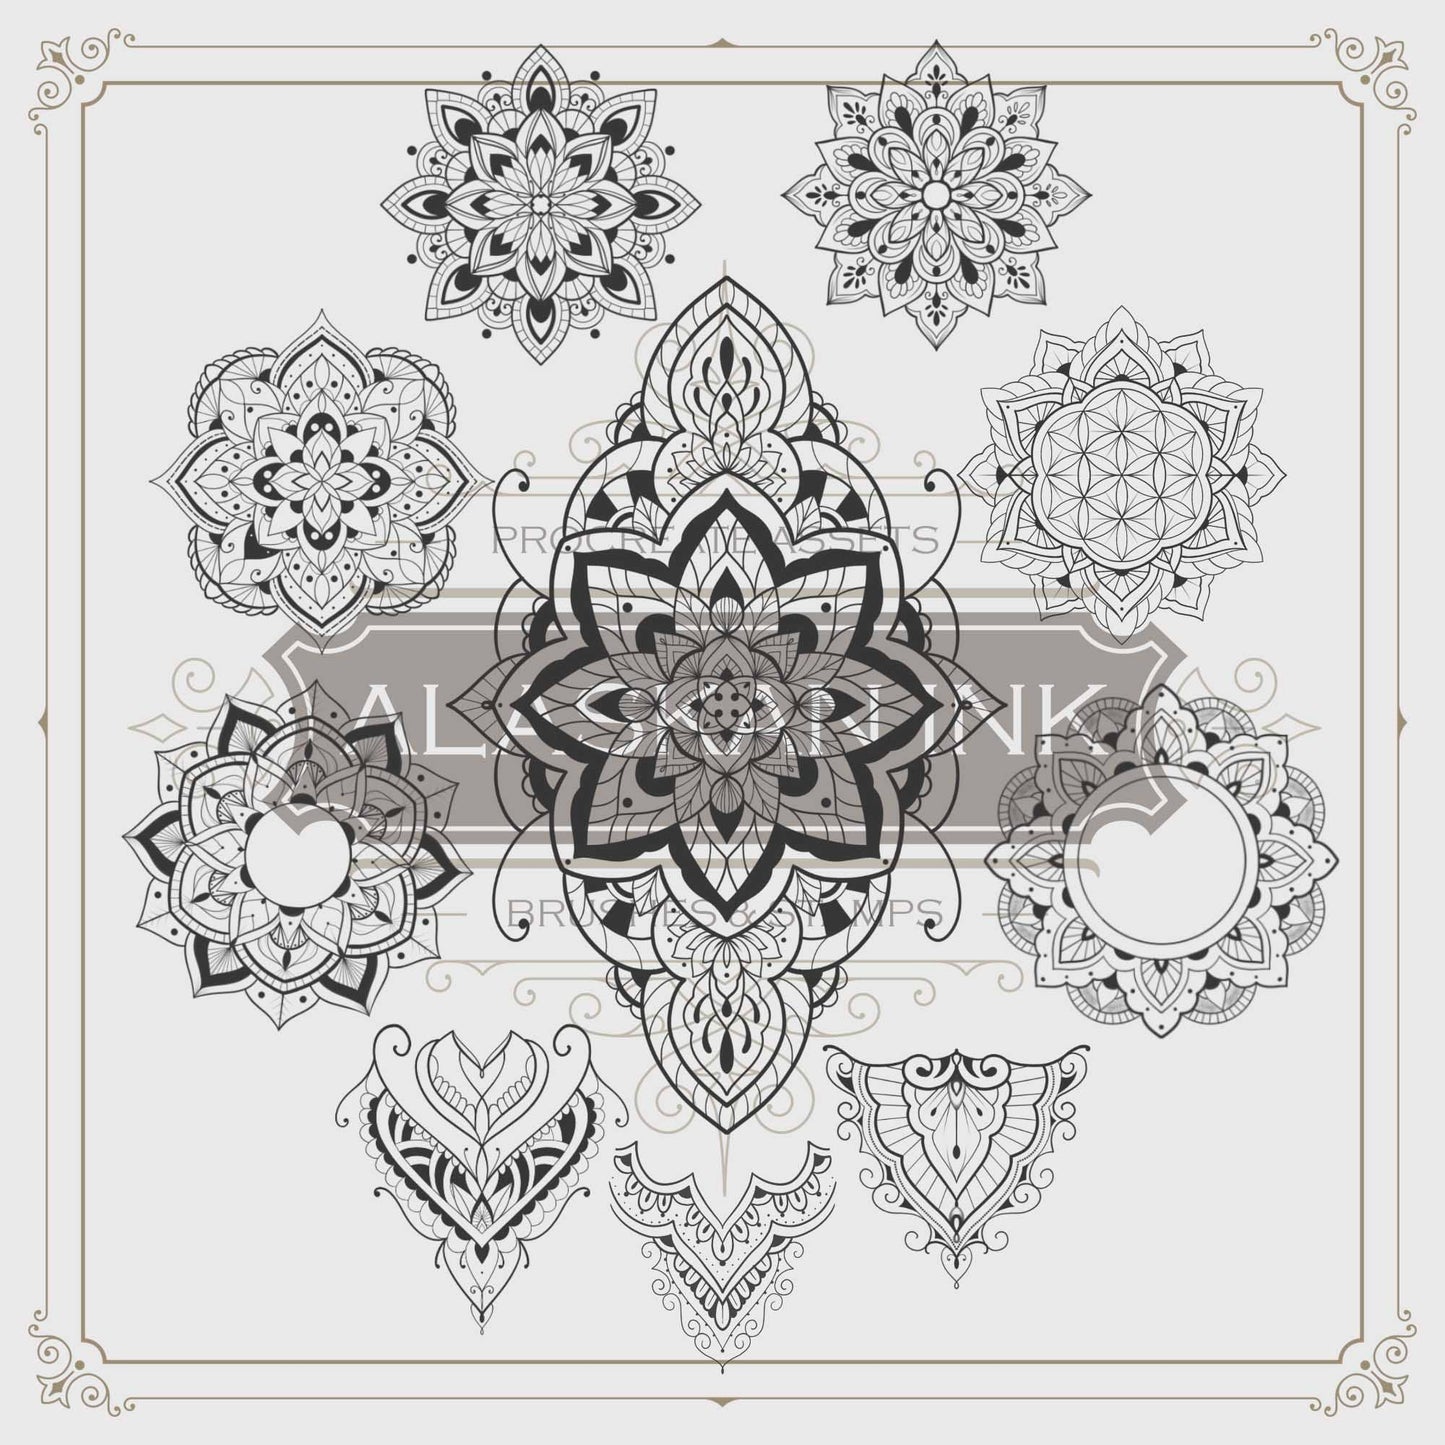 340 Flowers and Ornaments Tattoo Brushes for Procreate application iPad by Alaskan Ink Studio ink